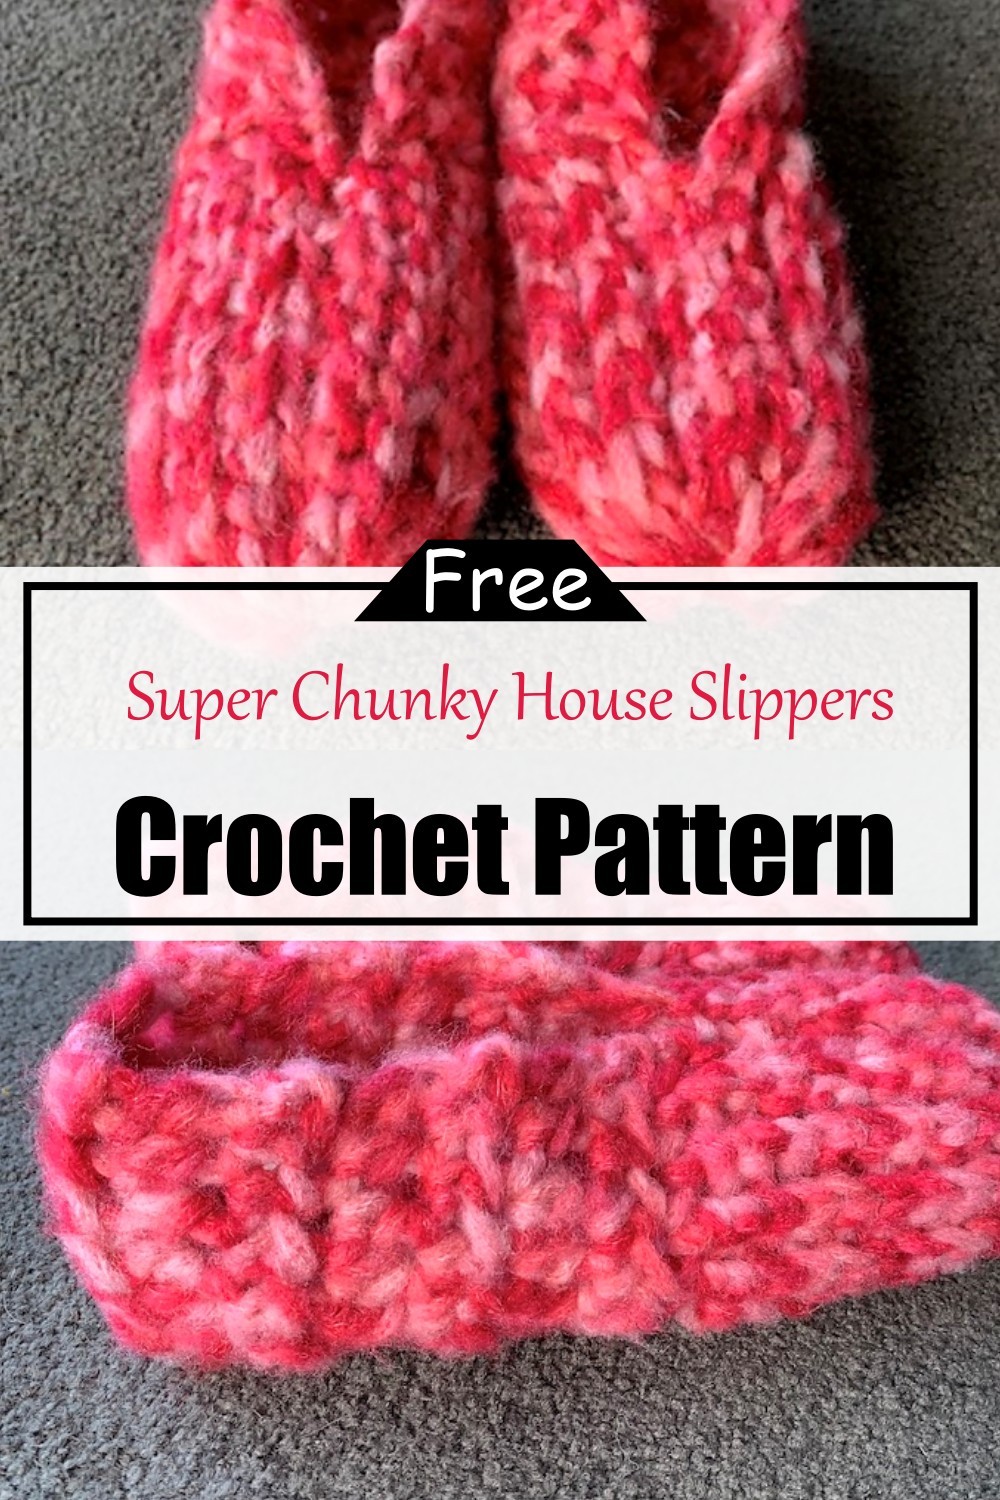 Super Chunky House Slippers